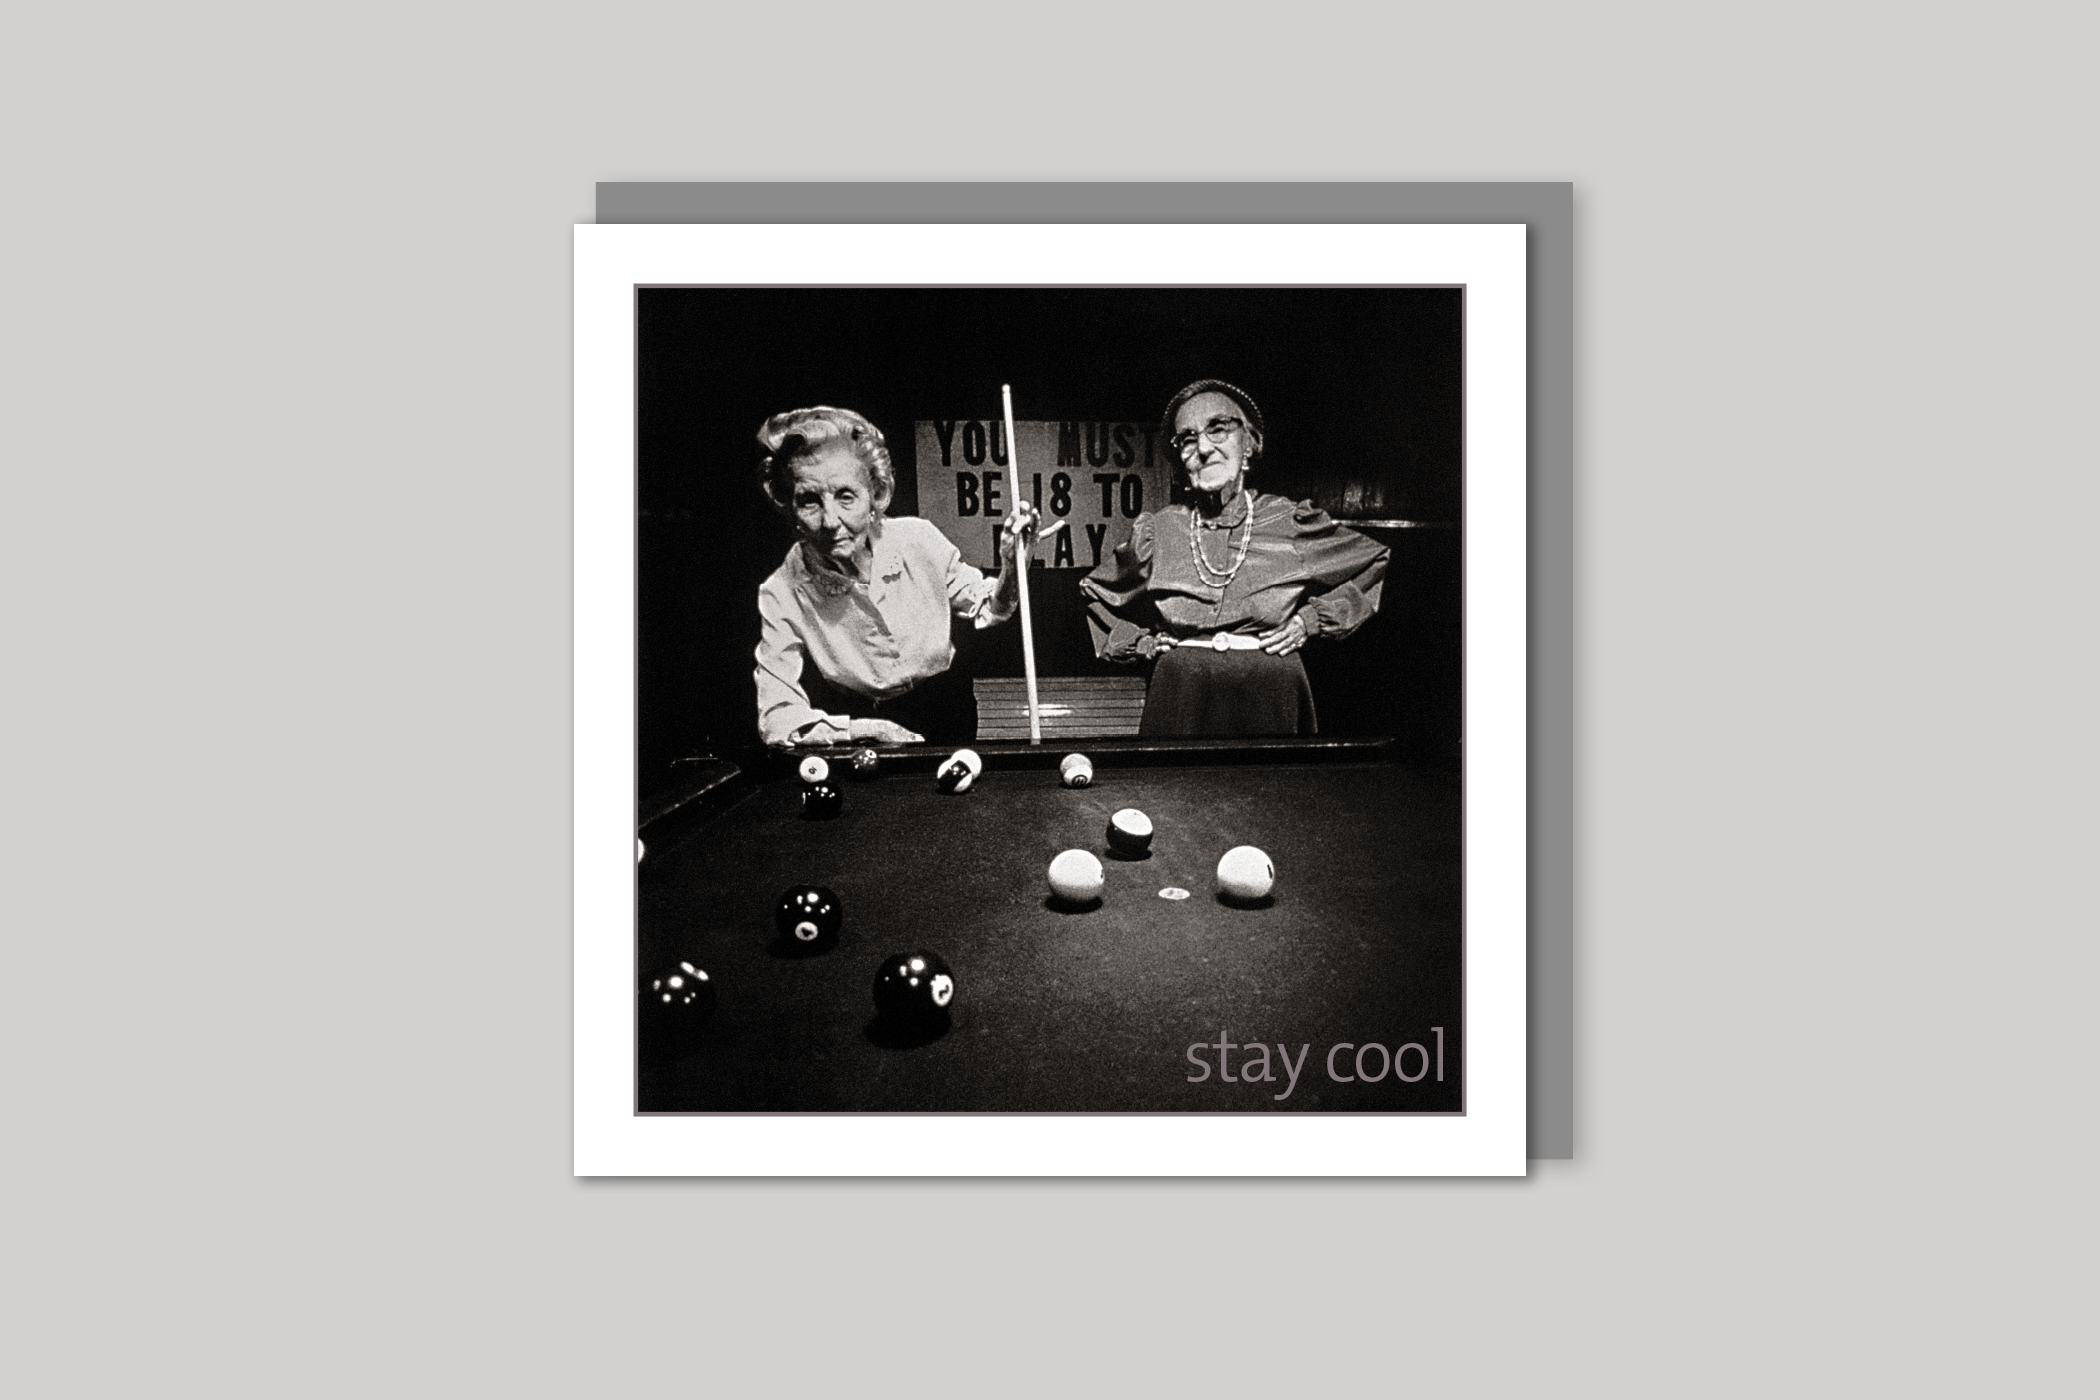 Stay Cool from Exposure Silver Edition range of greeting cards by Icon, back page.